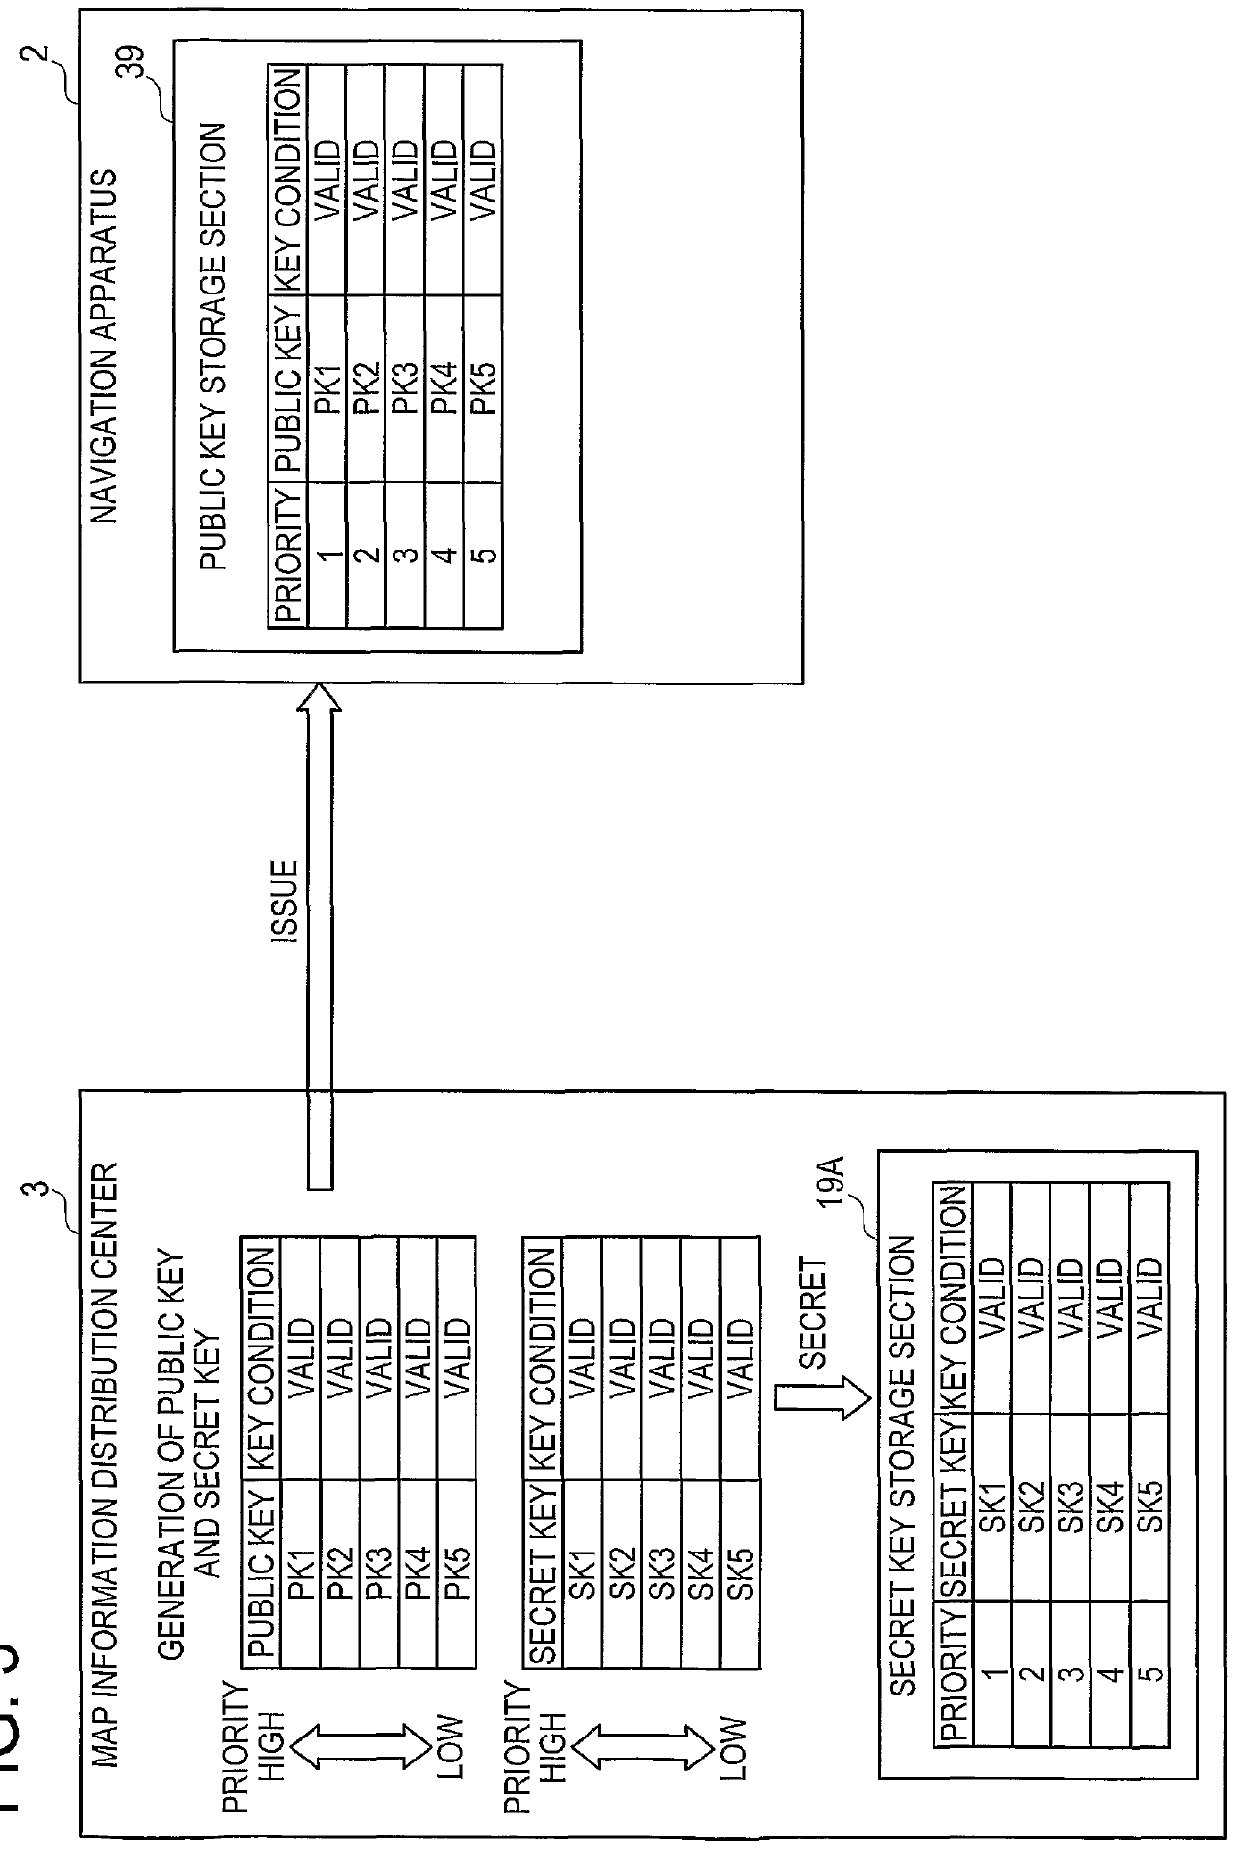 Navigation apparatus and information distribution system